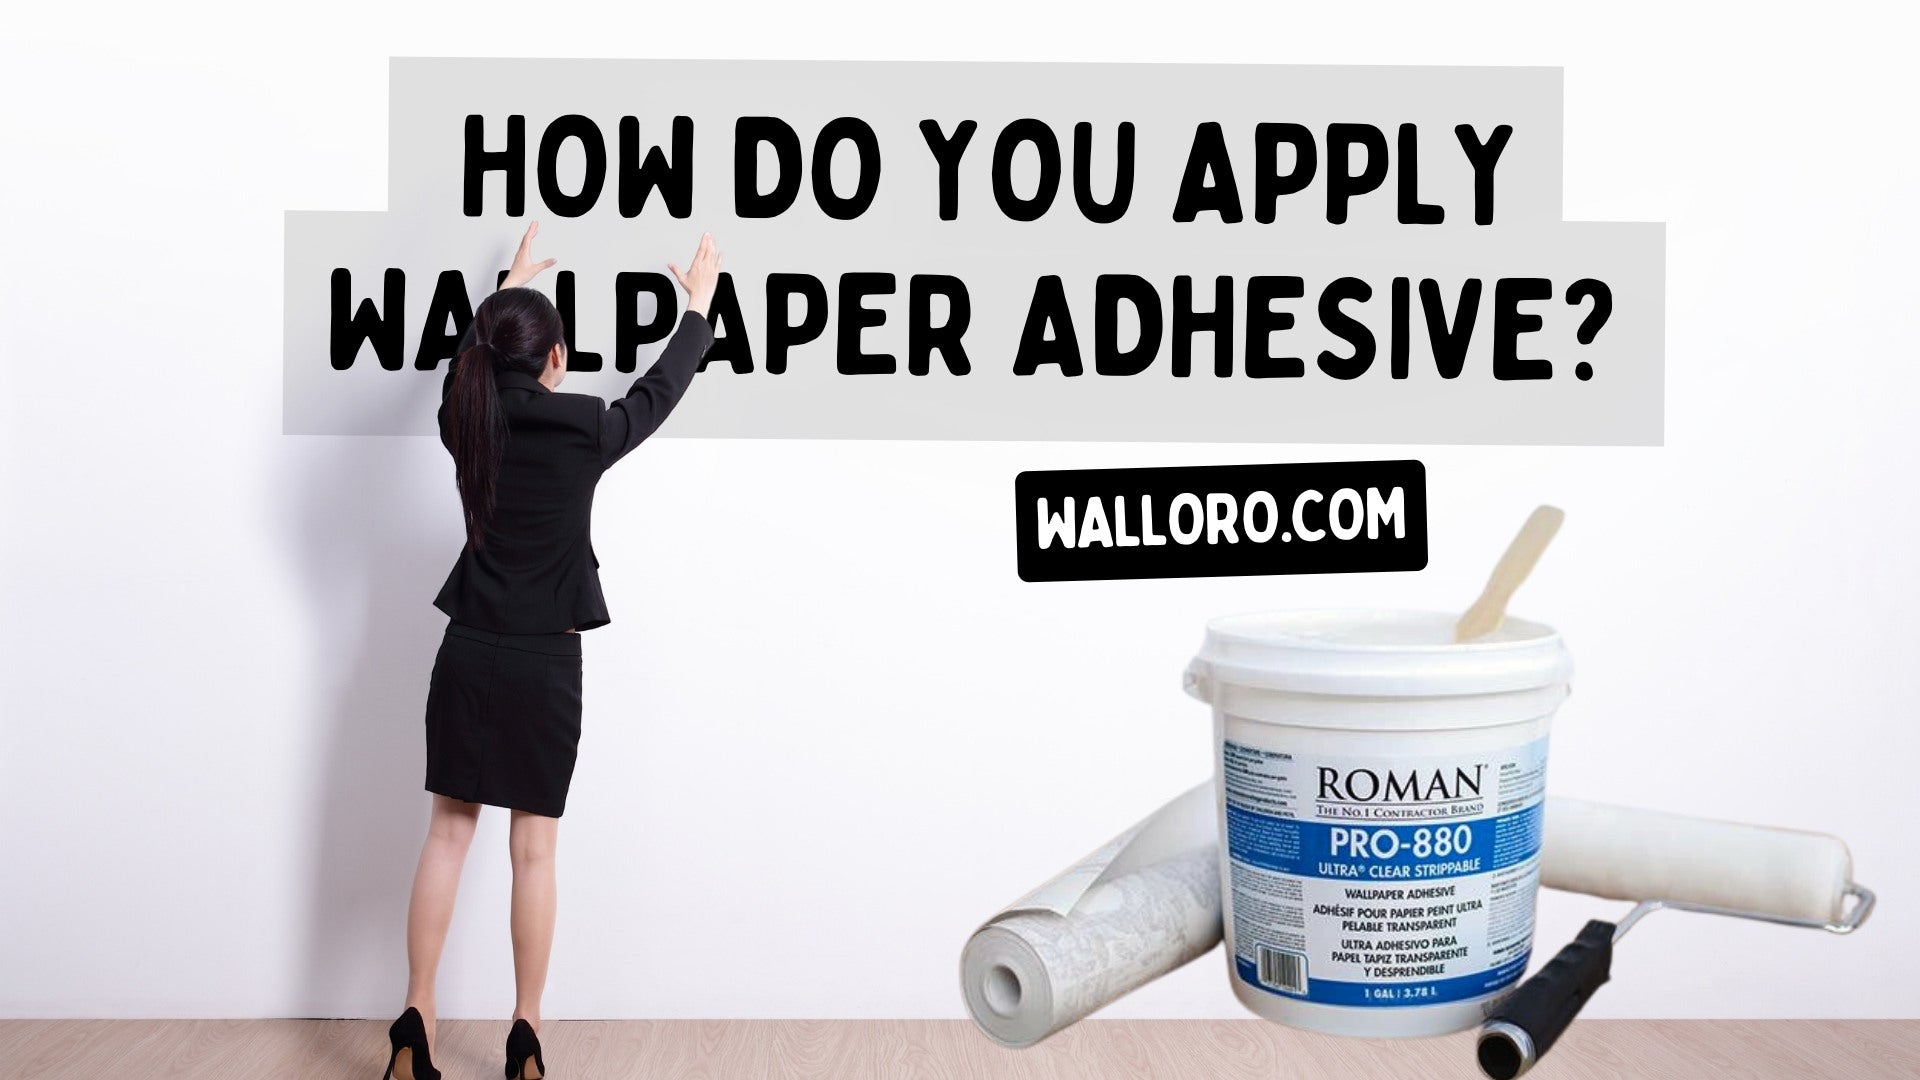 How do you apply wallpaper adhesive?